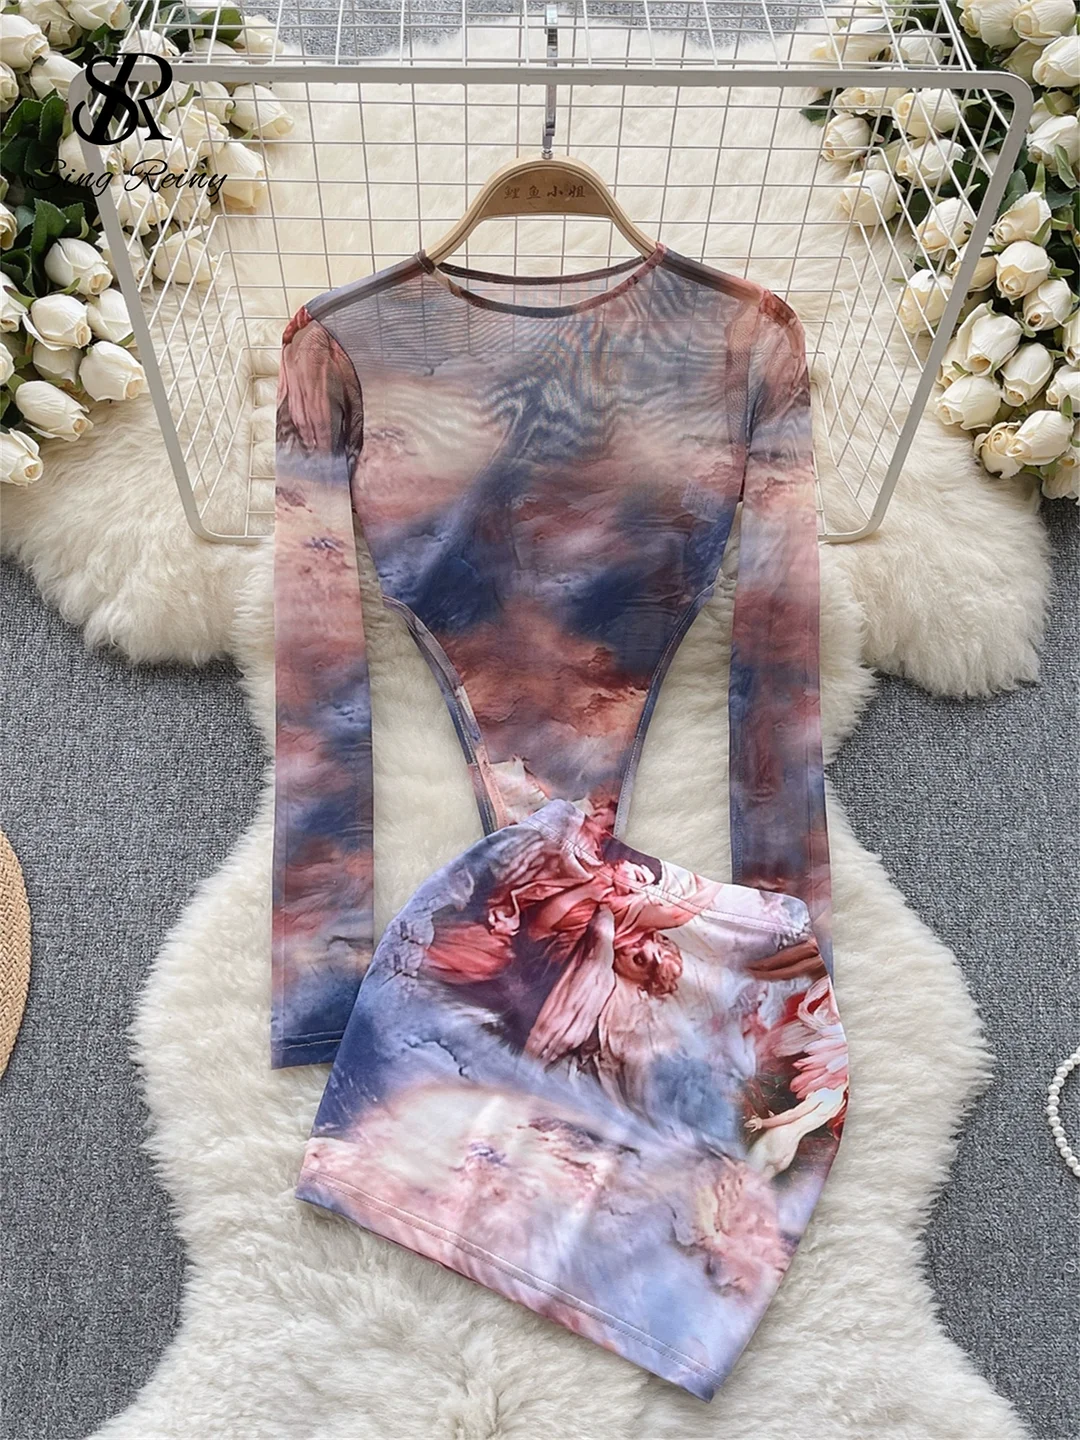 Huibahe Fashion Hotsweet Two Pieces Suits O Neck Long Sleeved Transparent BodySuit Top+ Skinny Mini Skirt Tie Dye Print Sets